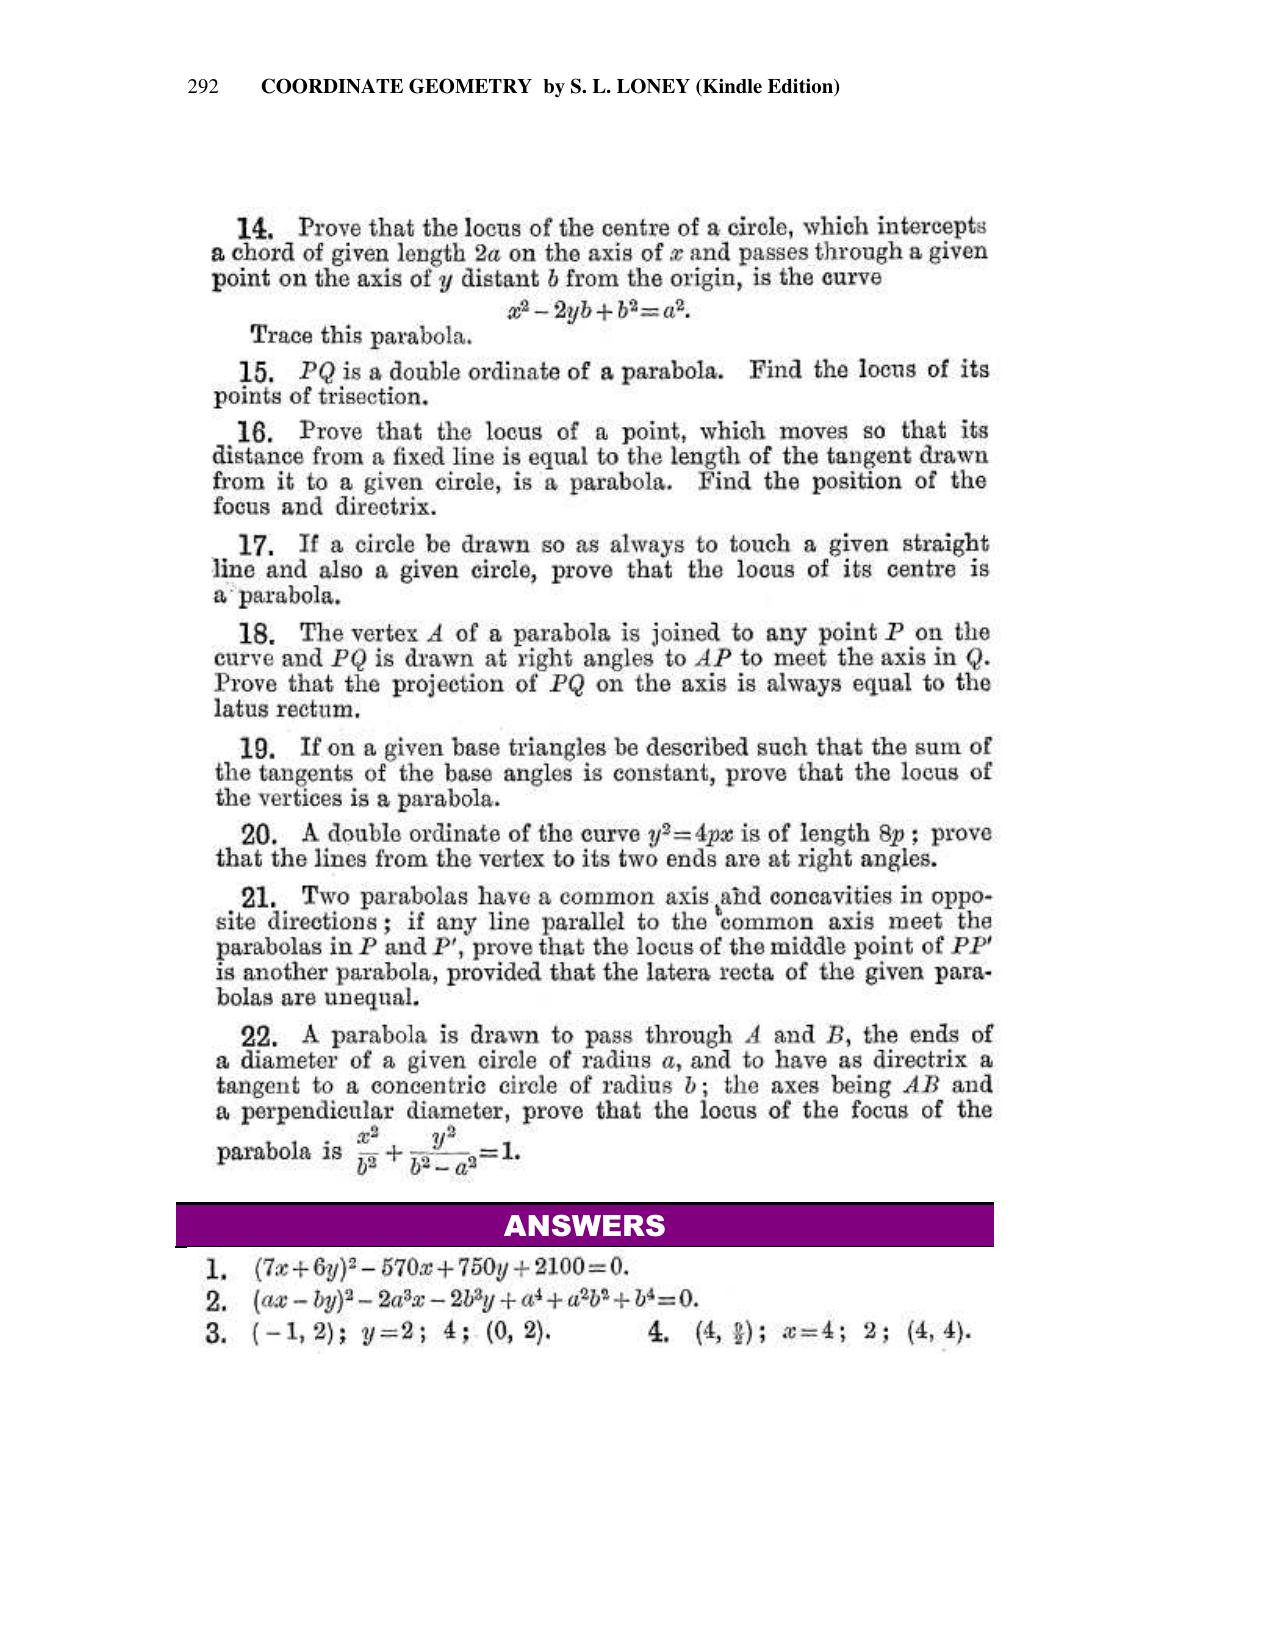 Chapter 10: The Parabola - SL Loney Solutions: The Elements of Coordinate Geometry - Page 6